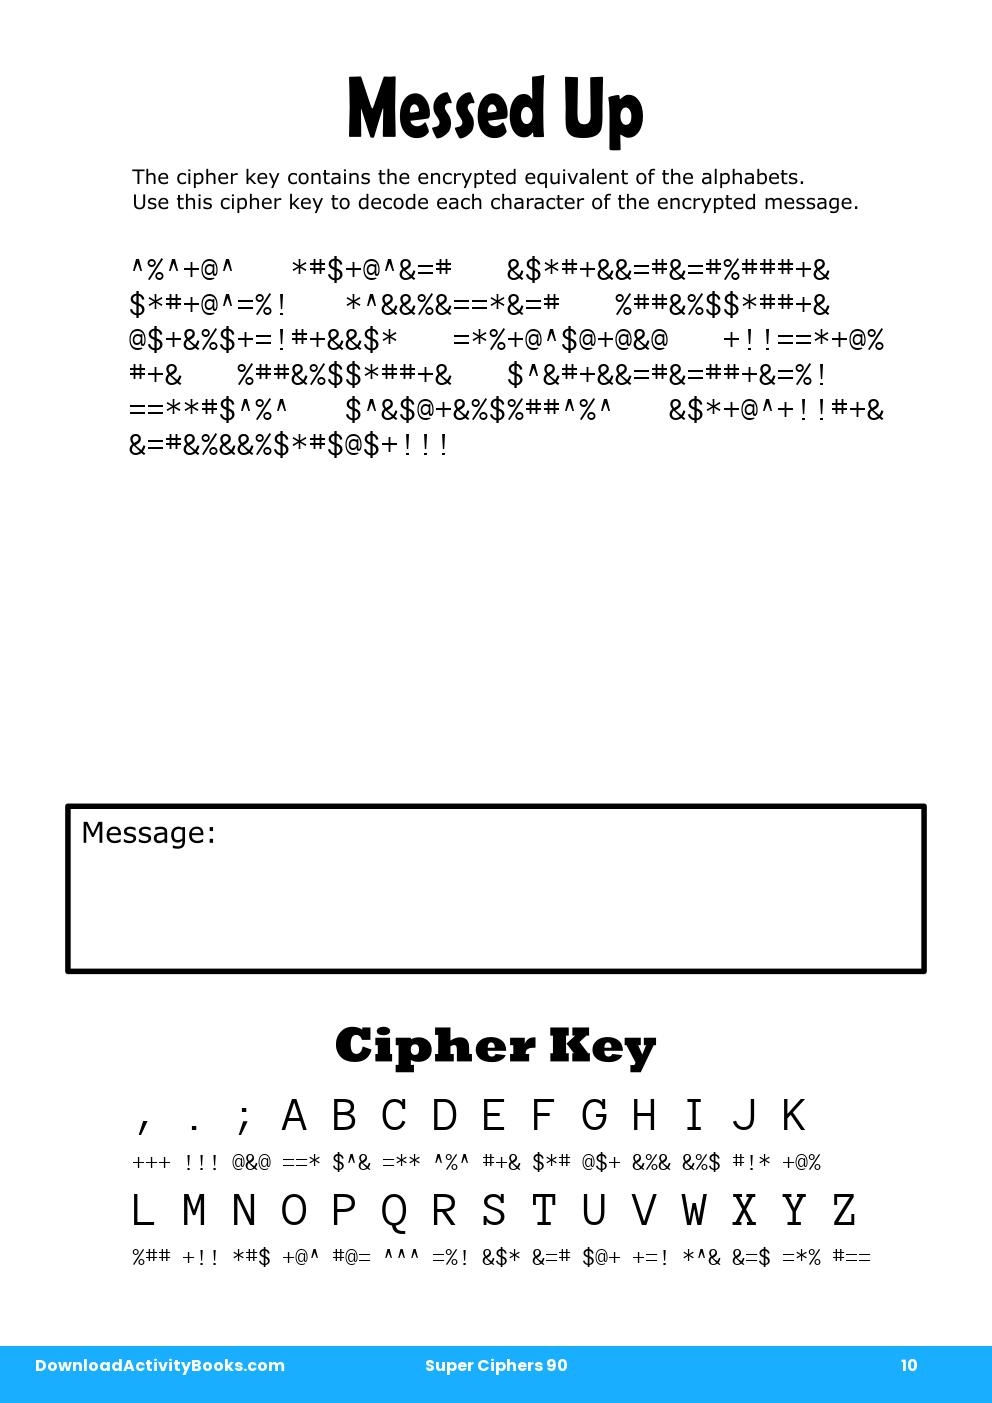 Messed Up in Super Ciphers 90